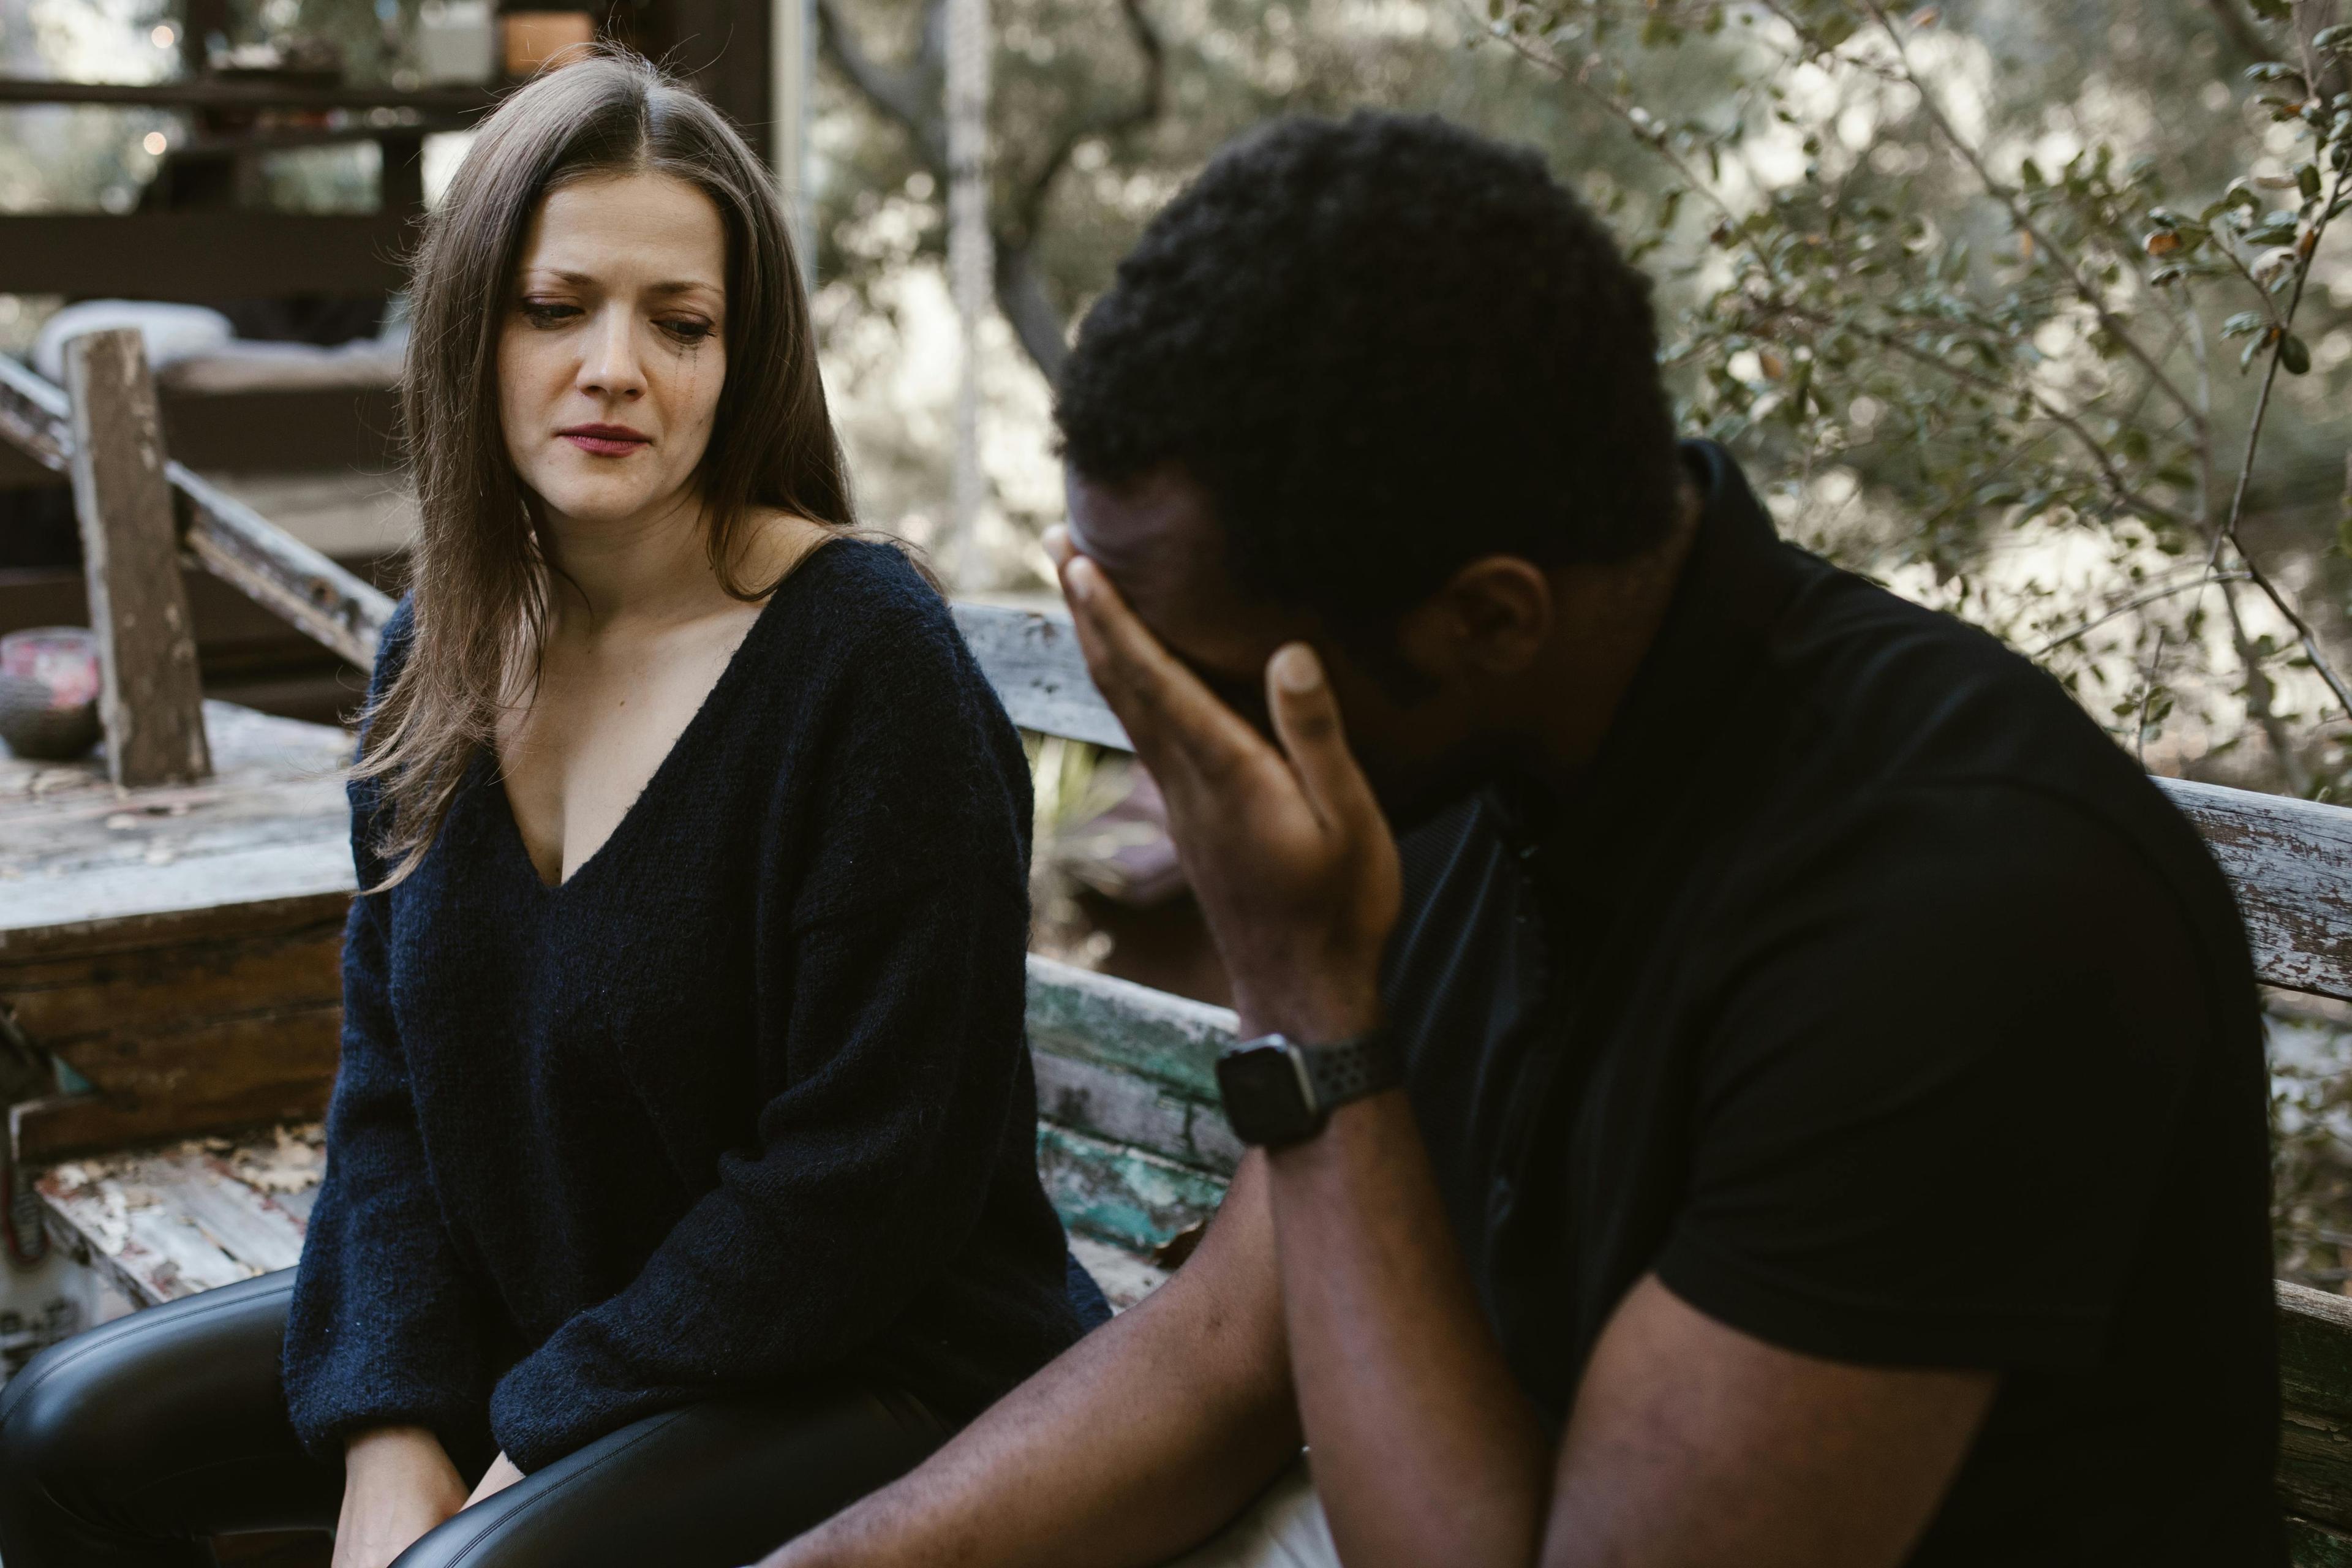 A woman and a man sitting on a bench, looking distant and disconnected, hinting at emotional cheating.